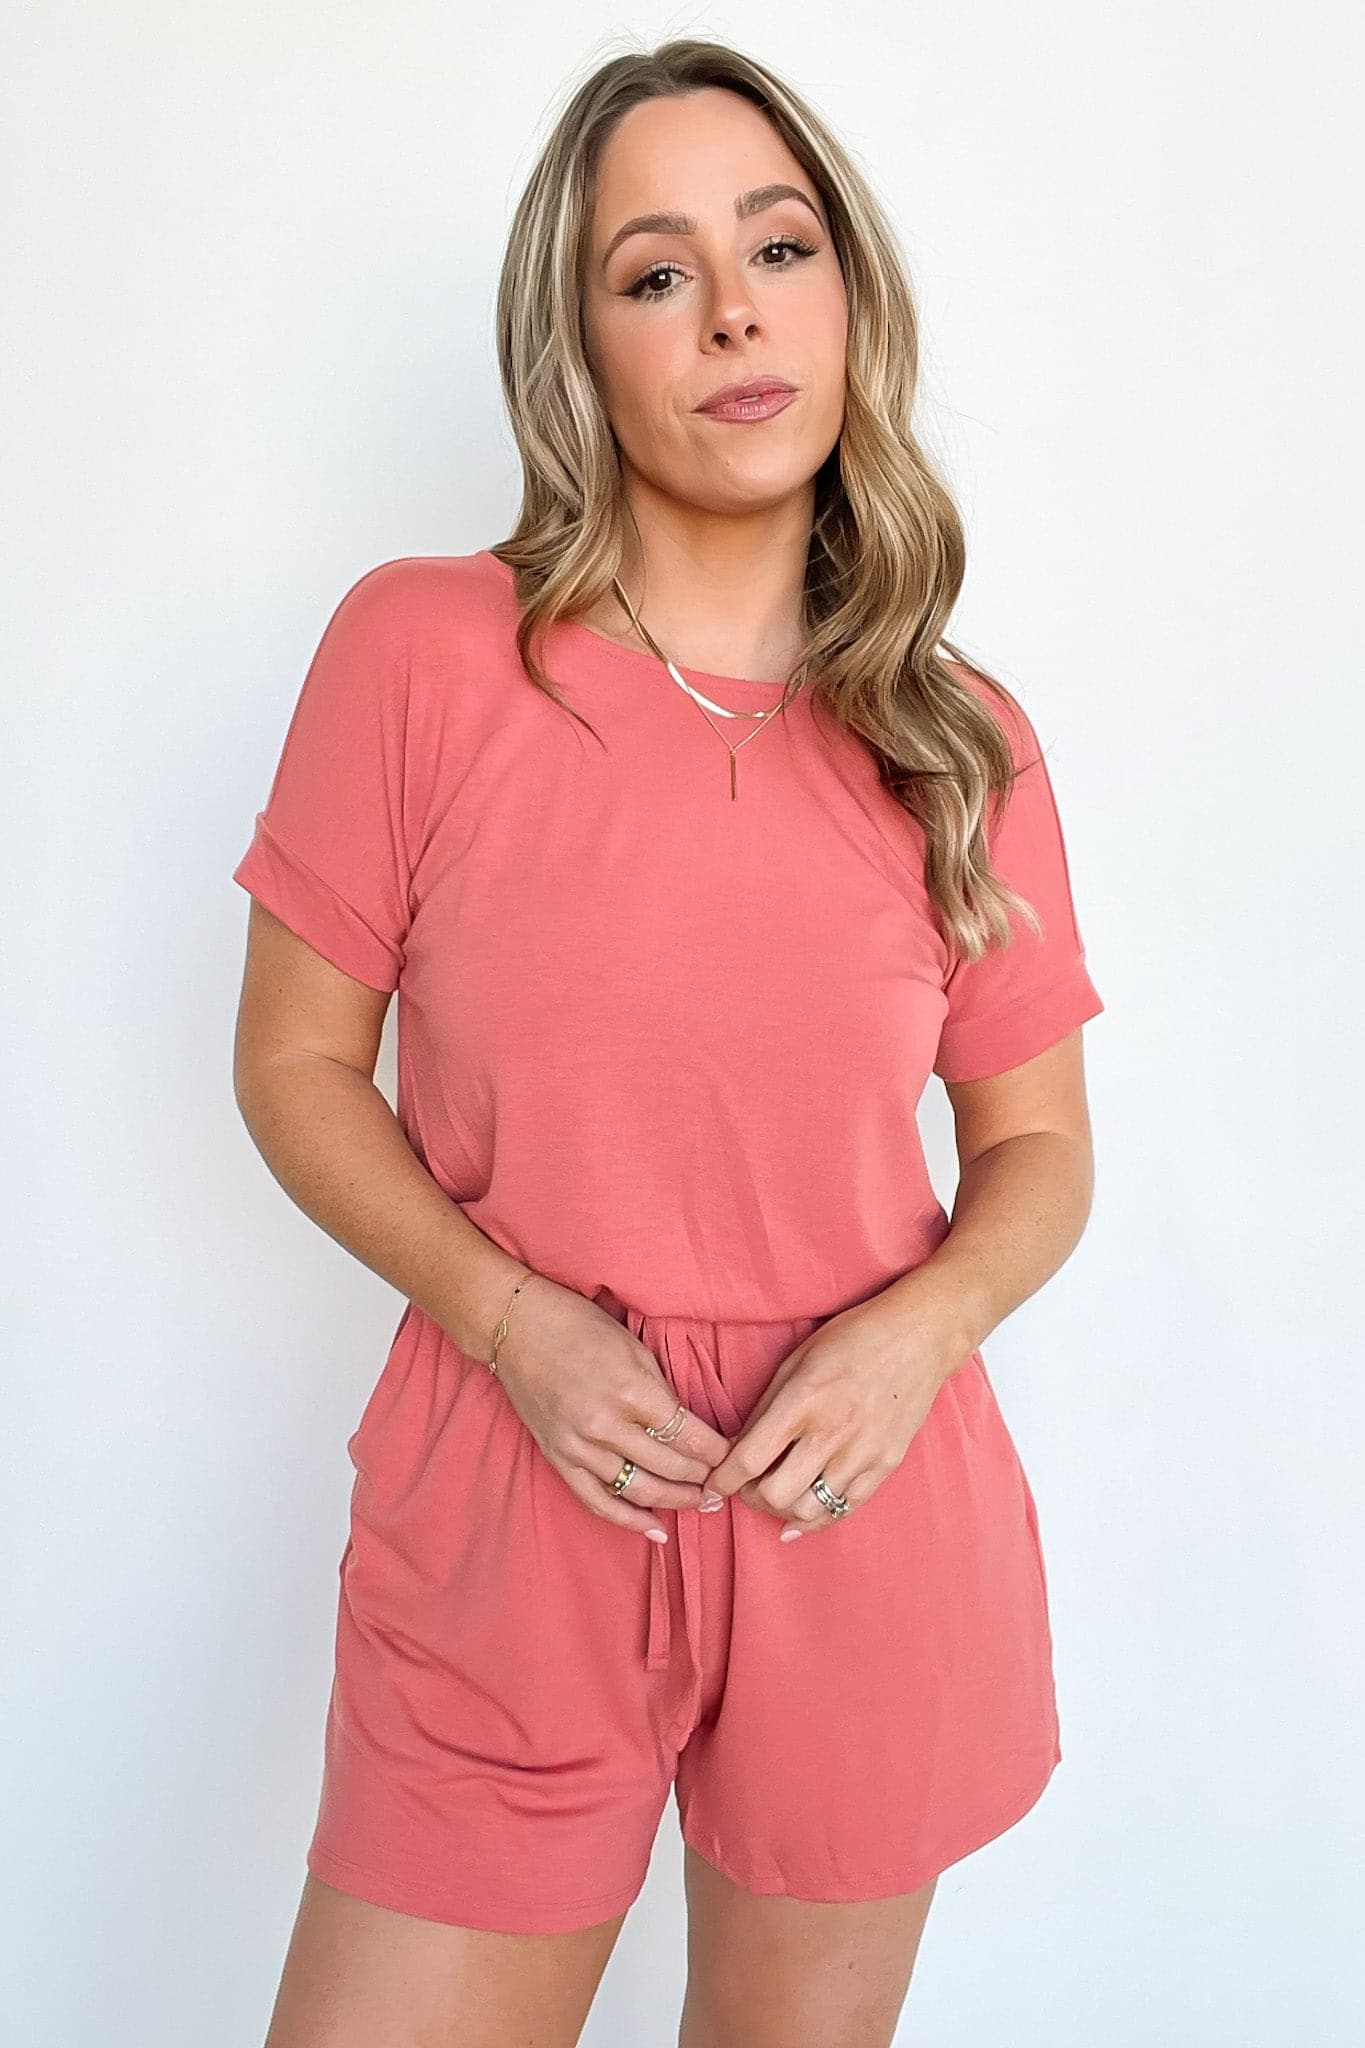  Casual Obsession Drawstring Romper - FINAL SALE - Madison and Mallory